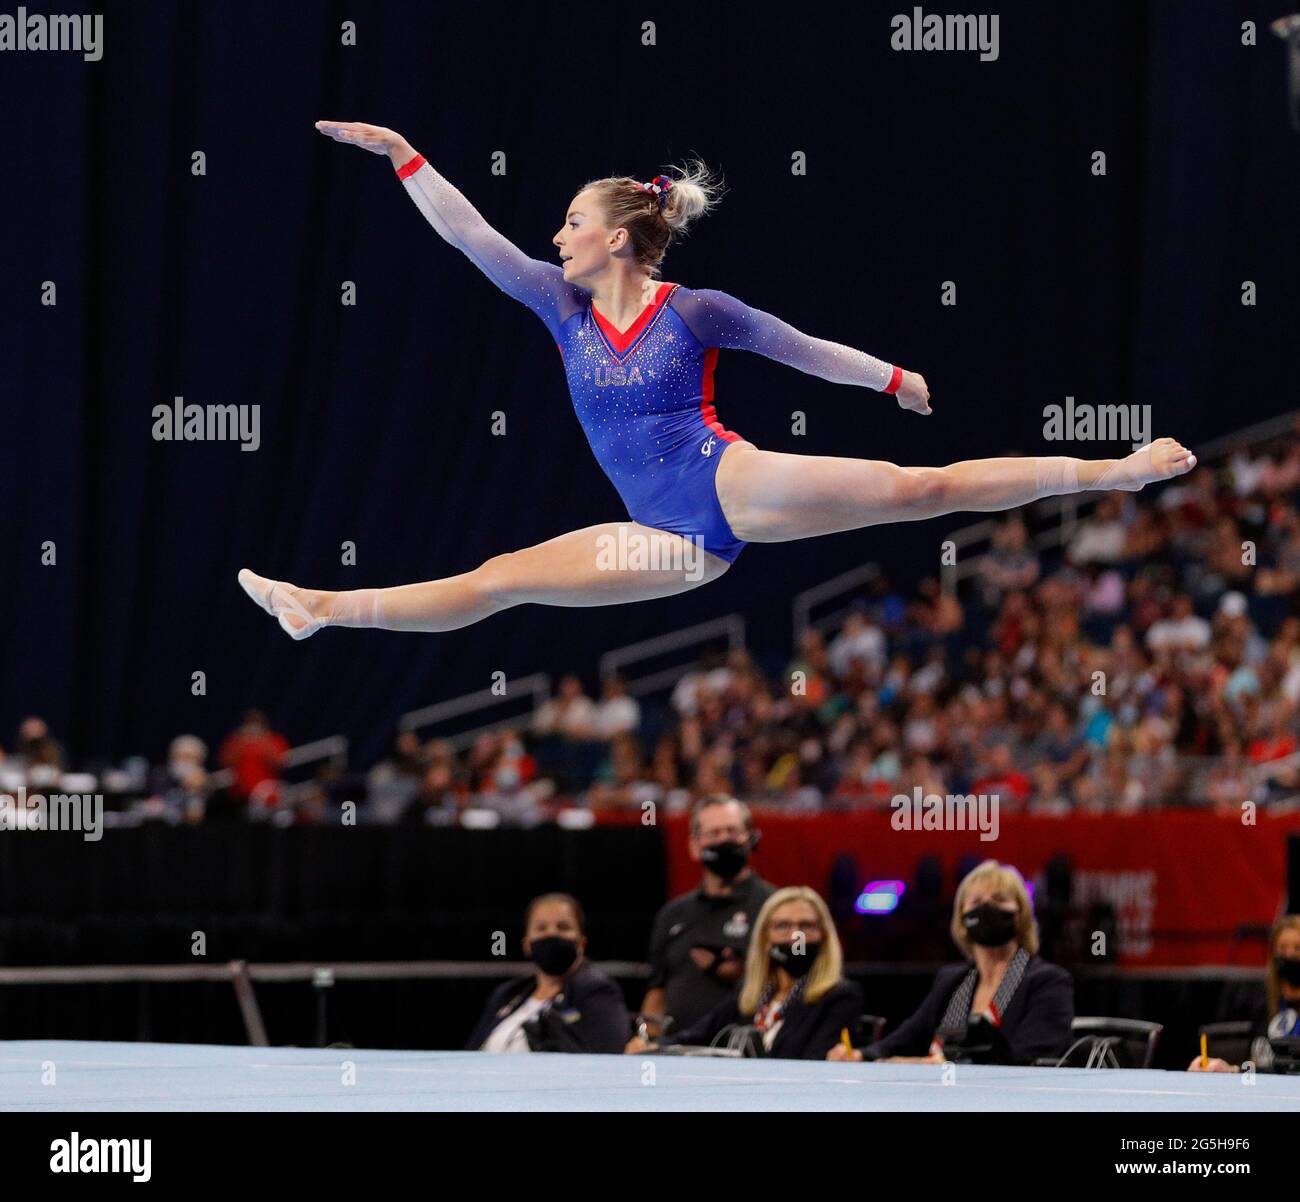 St Louis, USA. June 27, 2021: MyKayla Skinner leaps into the air during Day 2 of the 2021 U.S. Women's Gymnastics Olympic Team Trials at the Dome at America's Center in St. Louis, MO. Kyle Okita/CSM Credit: Cal Sport Media/Alamy Live News Stock Photo